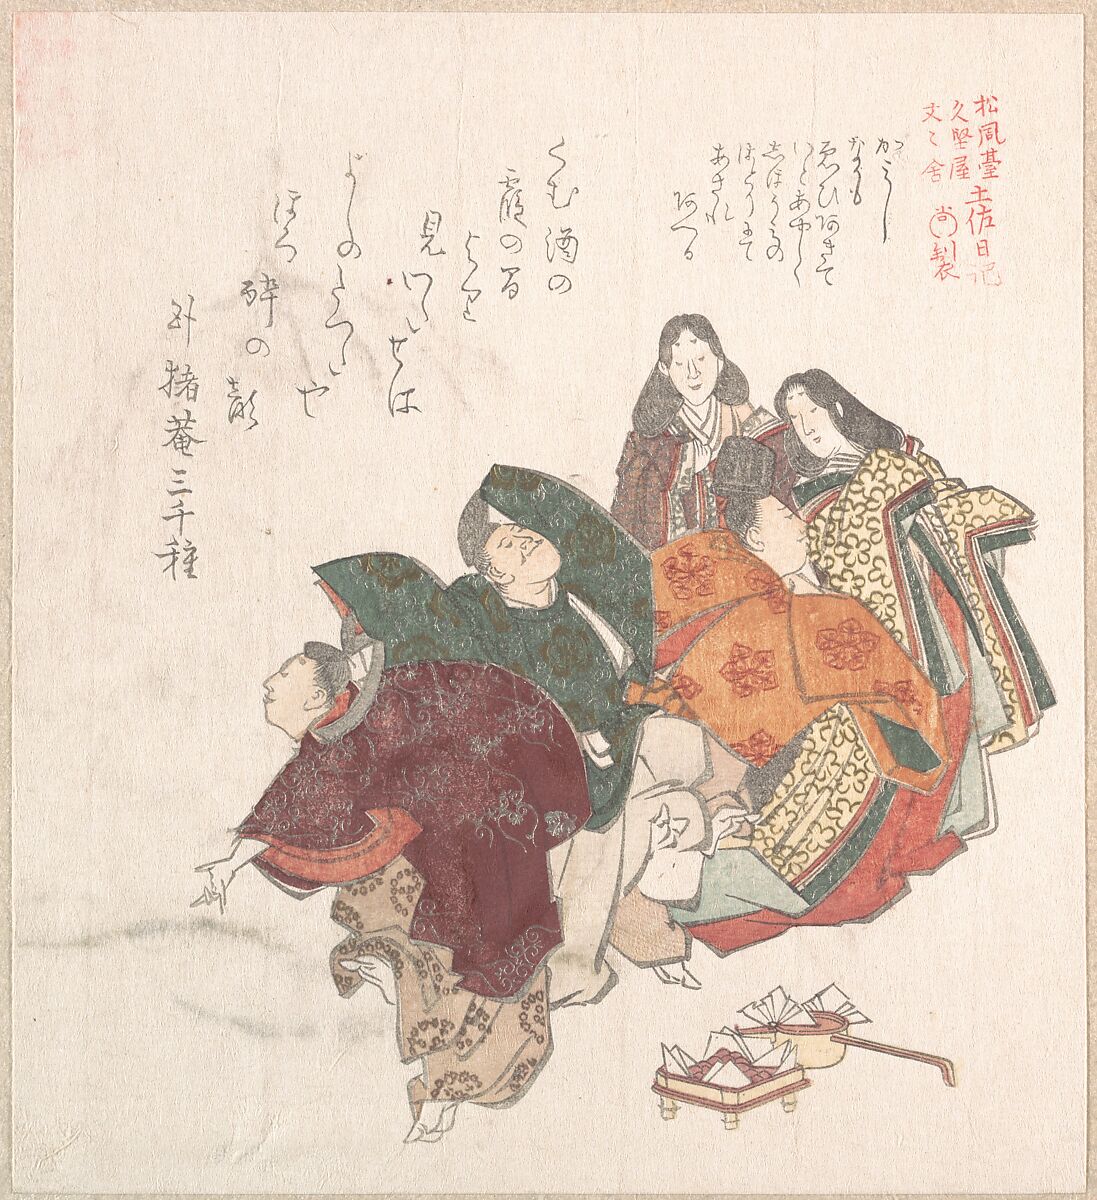 Men and Women in Court Costume Dancing, Kubo Shunman (Japanese, 1757–1820) (?), Woodblock print (surimono); ink and color on paper, Japan 